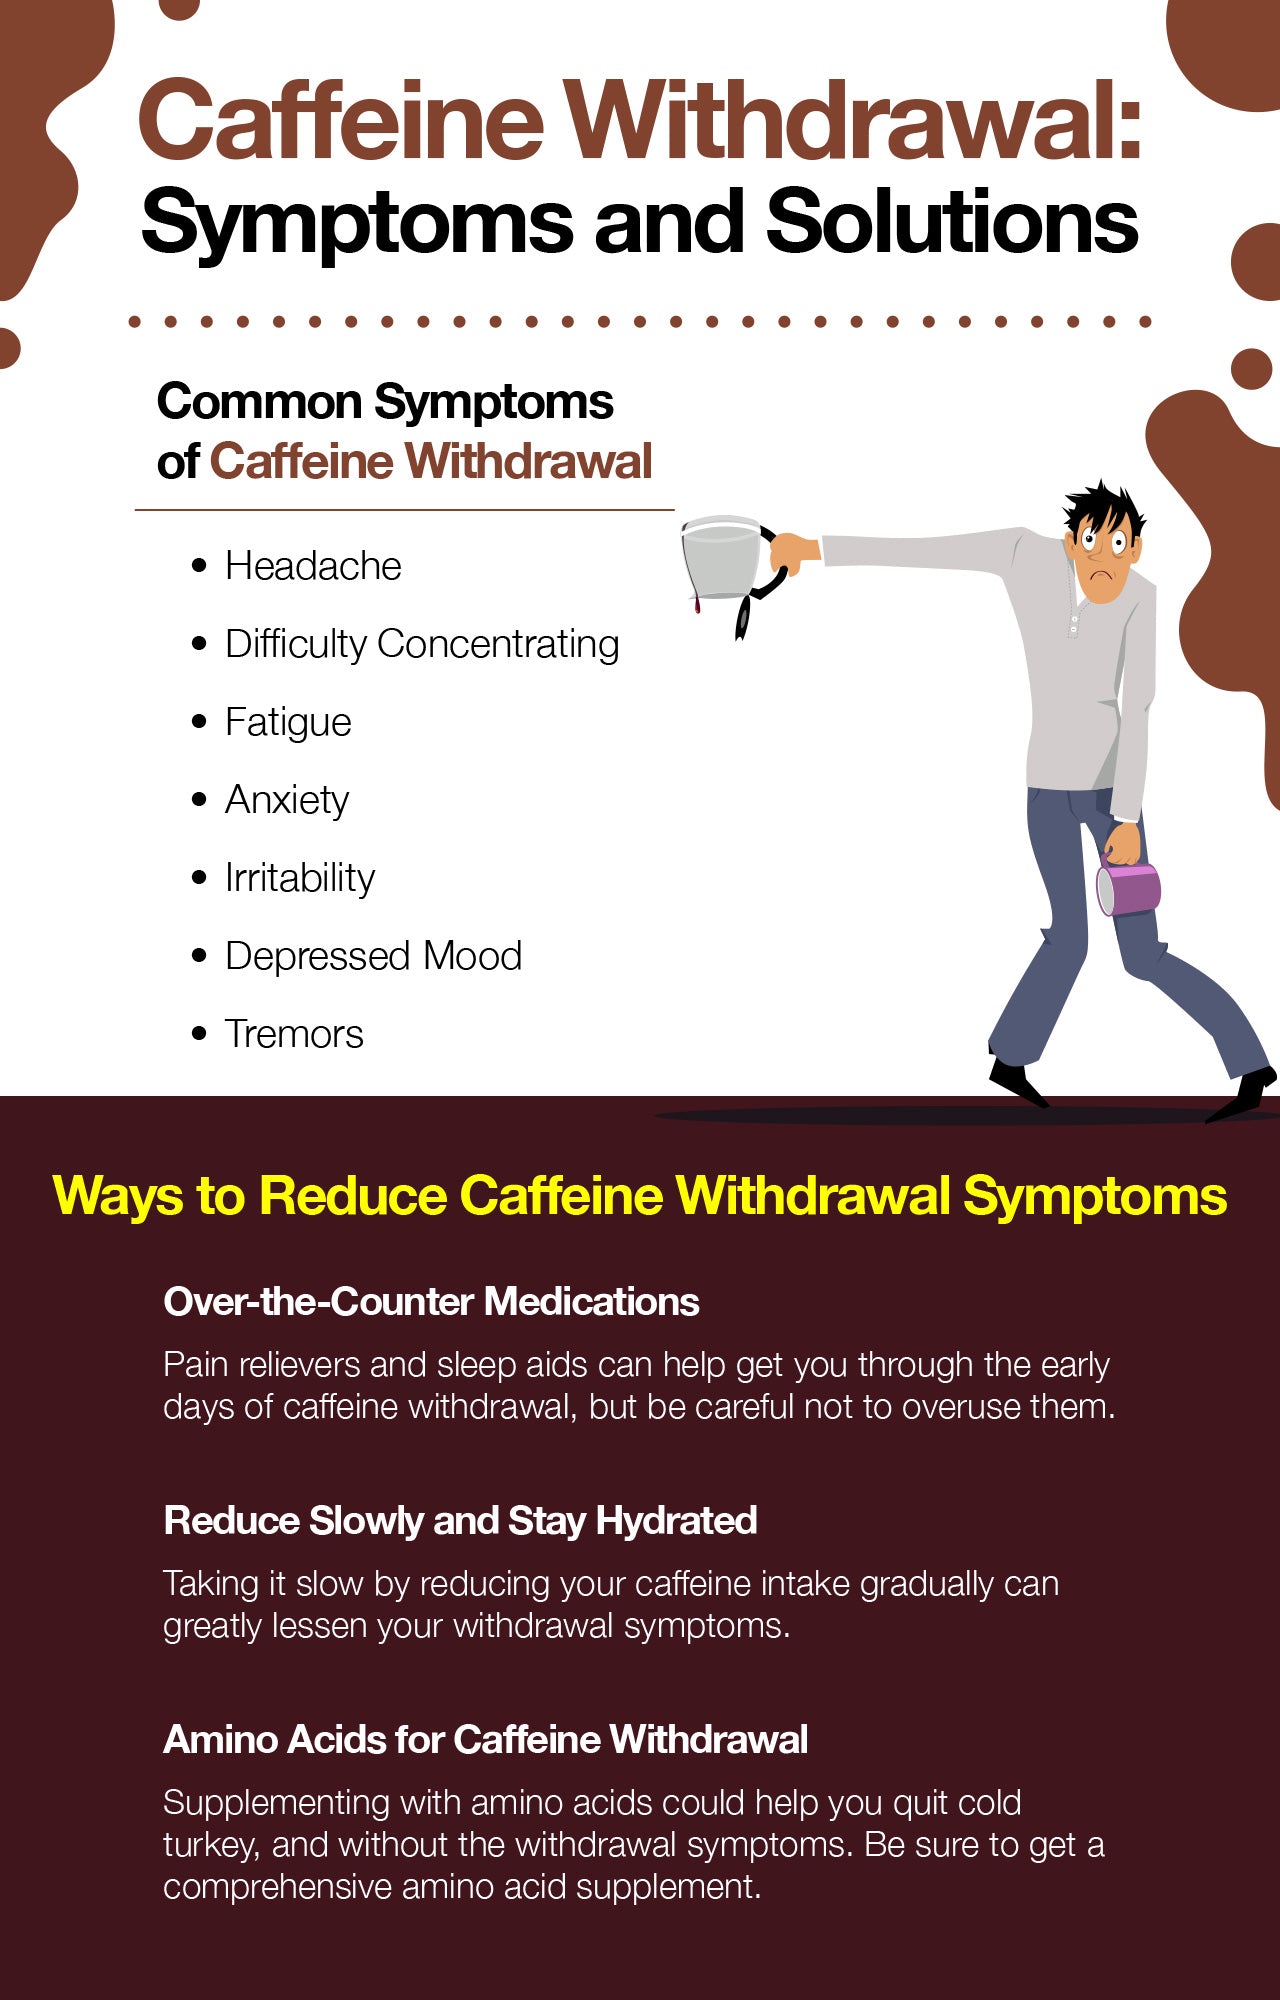 Does Ibuprofen Help With Caffeine Withdrawal?